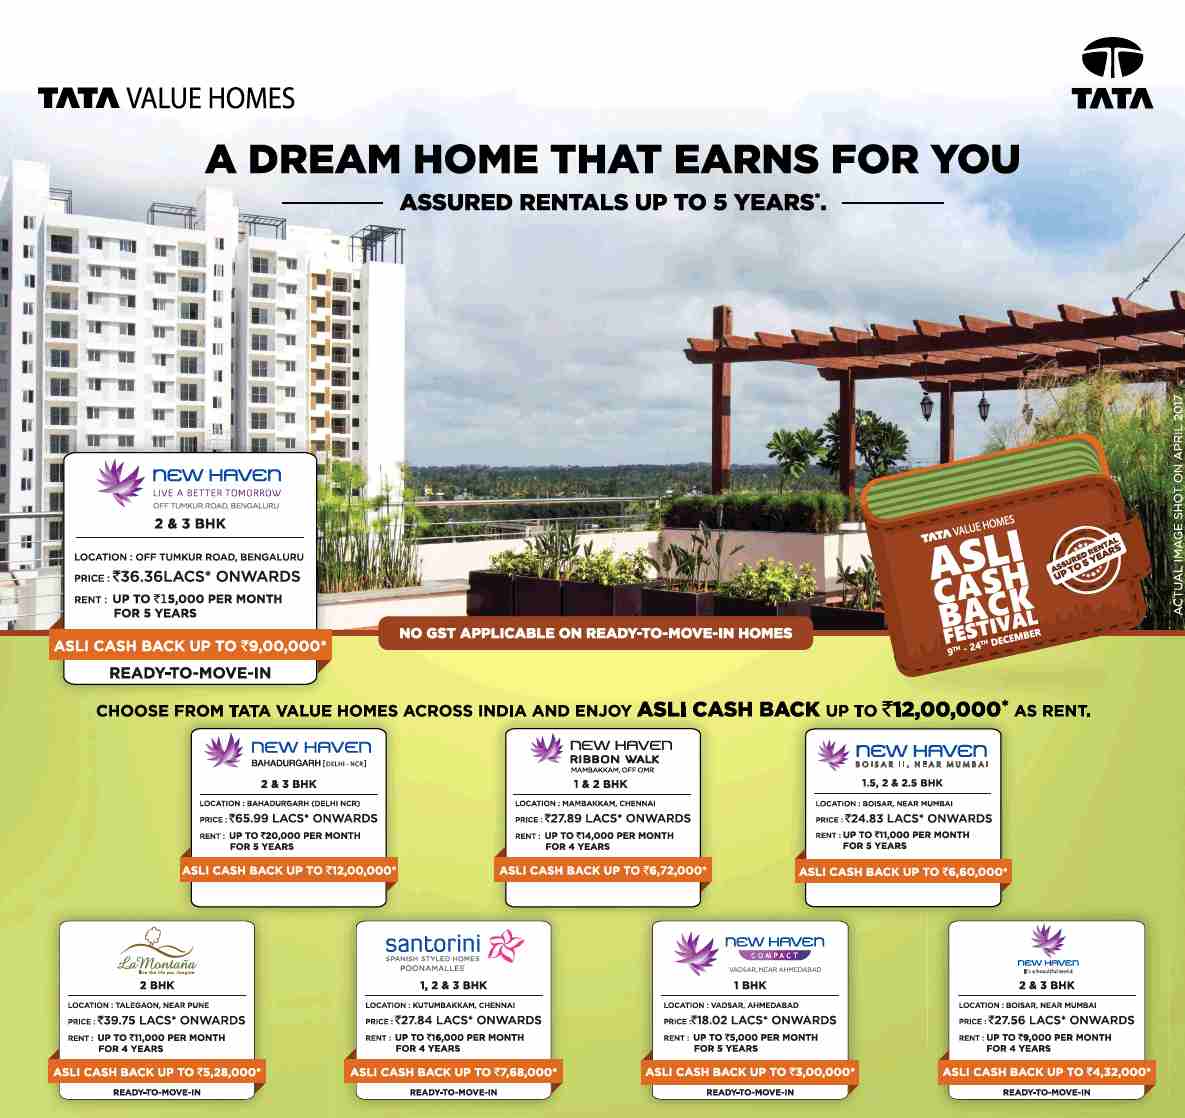 Invest in a dream home that earns for you at Tata Properties Update